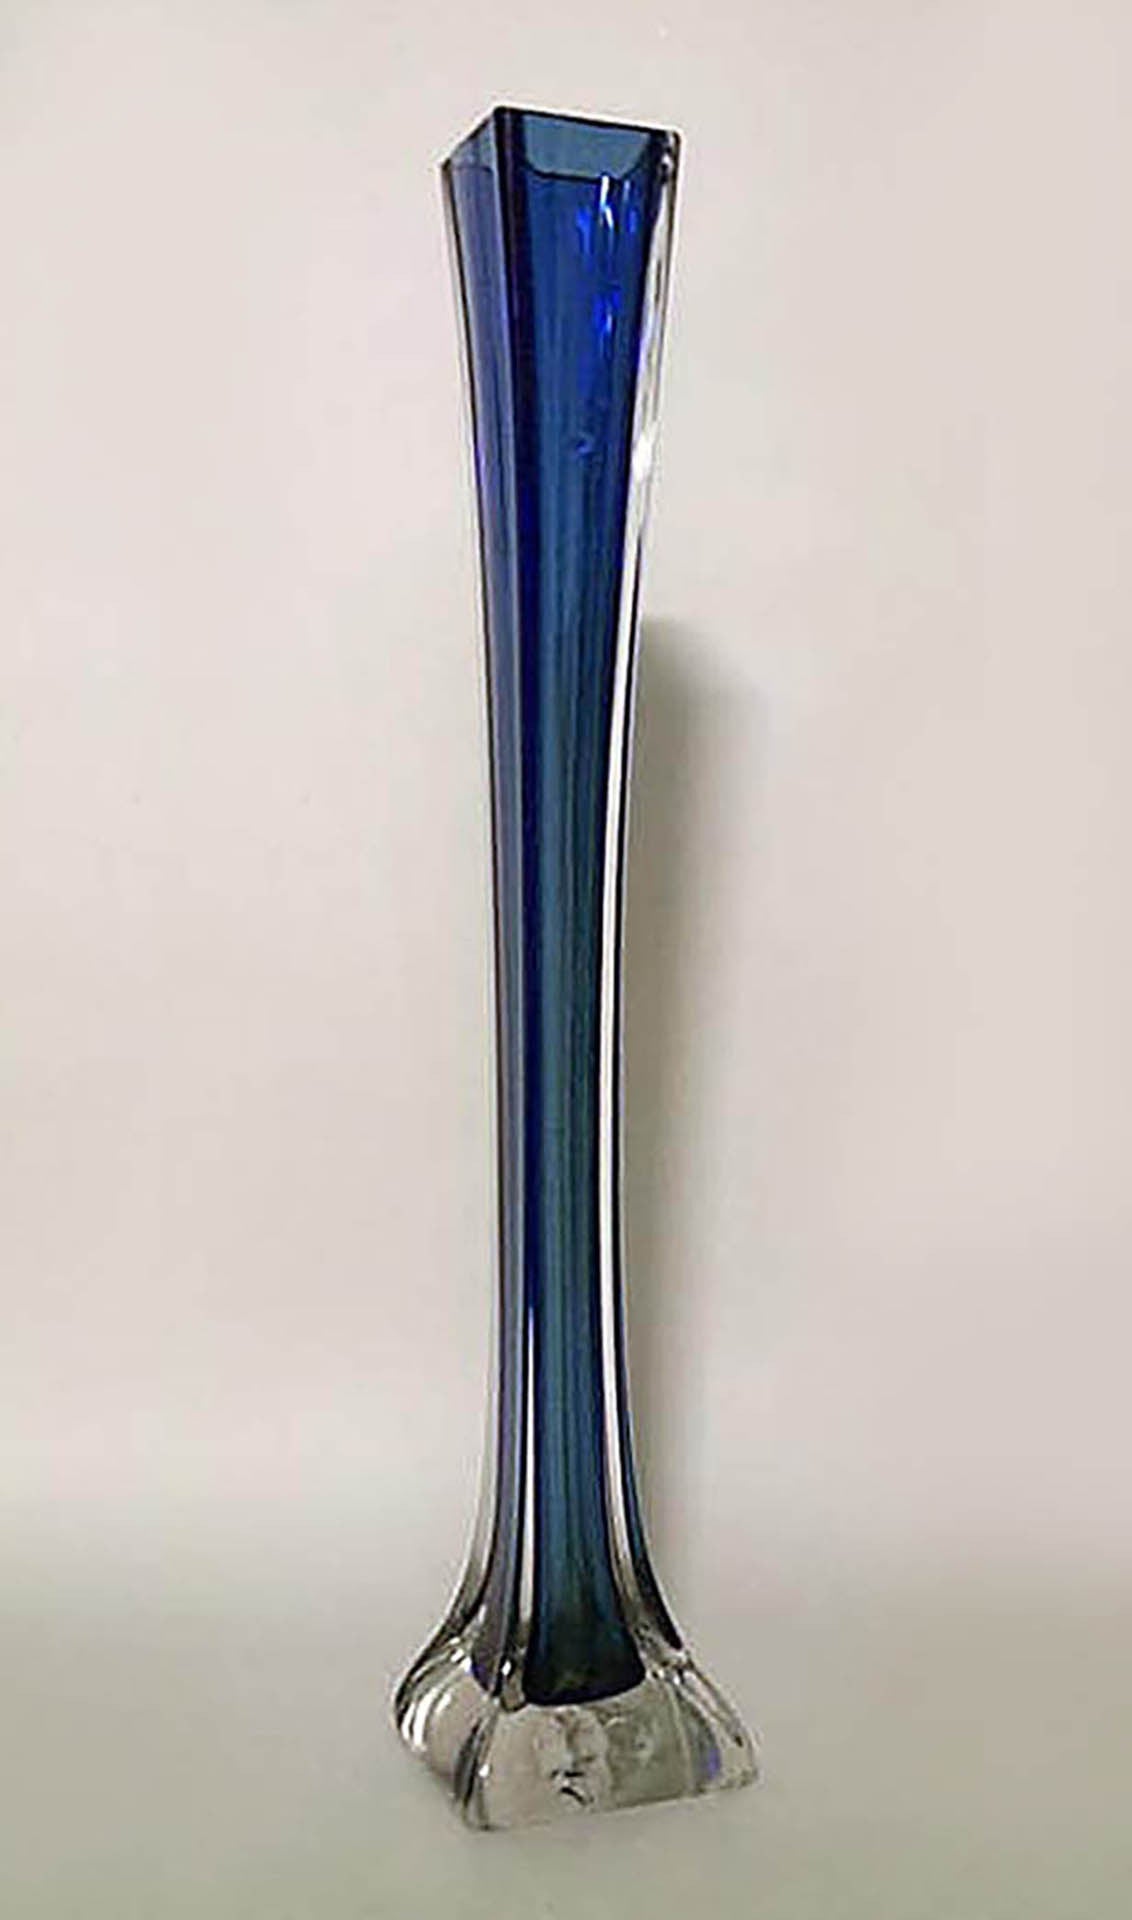 Pair of American Art Deco tall blue glass bud vases with square shaped bases.